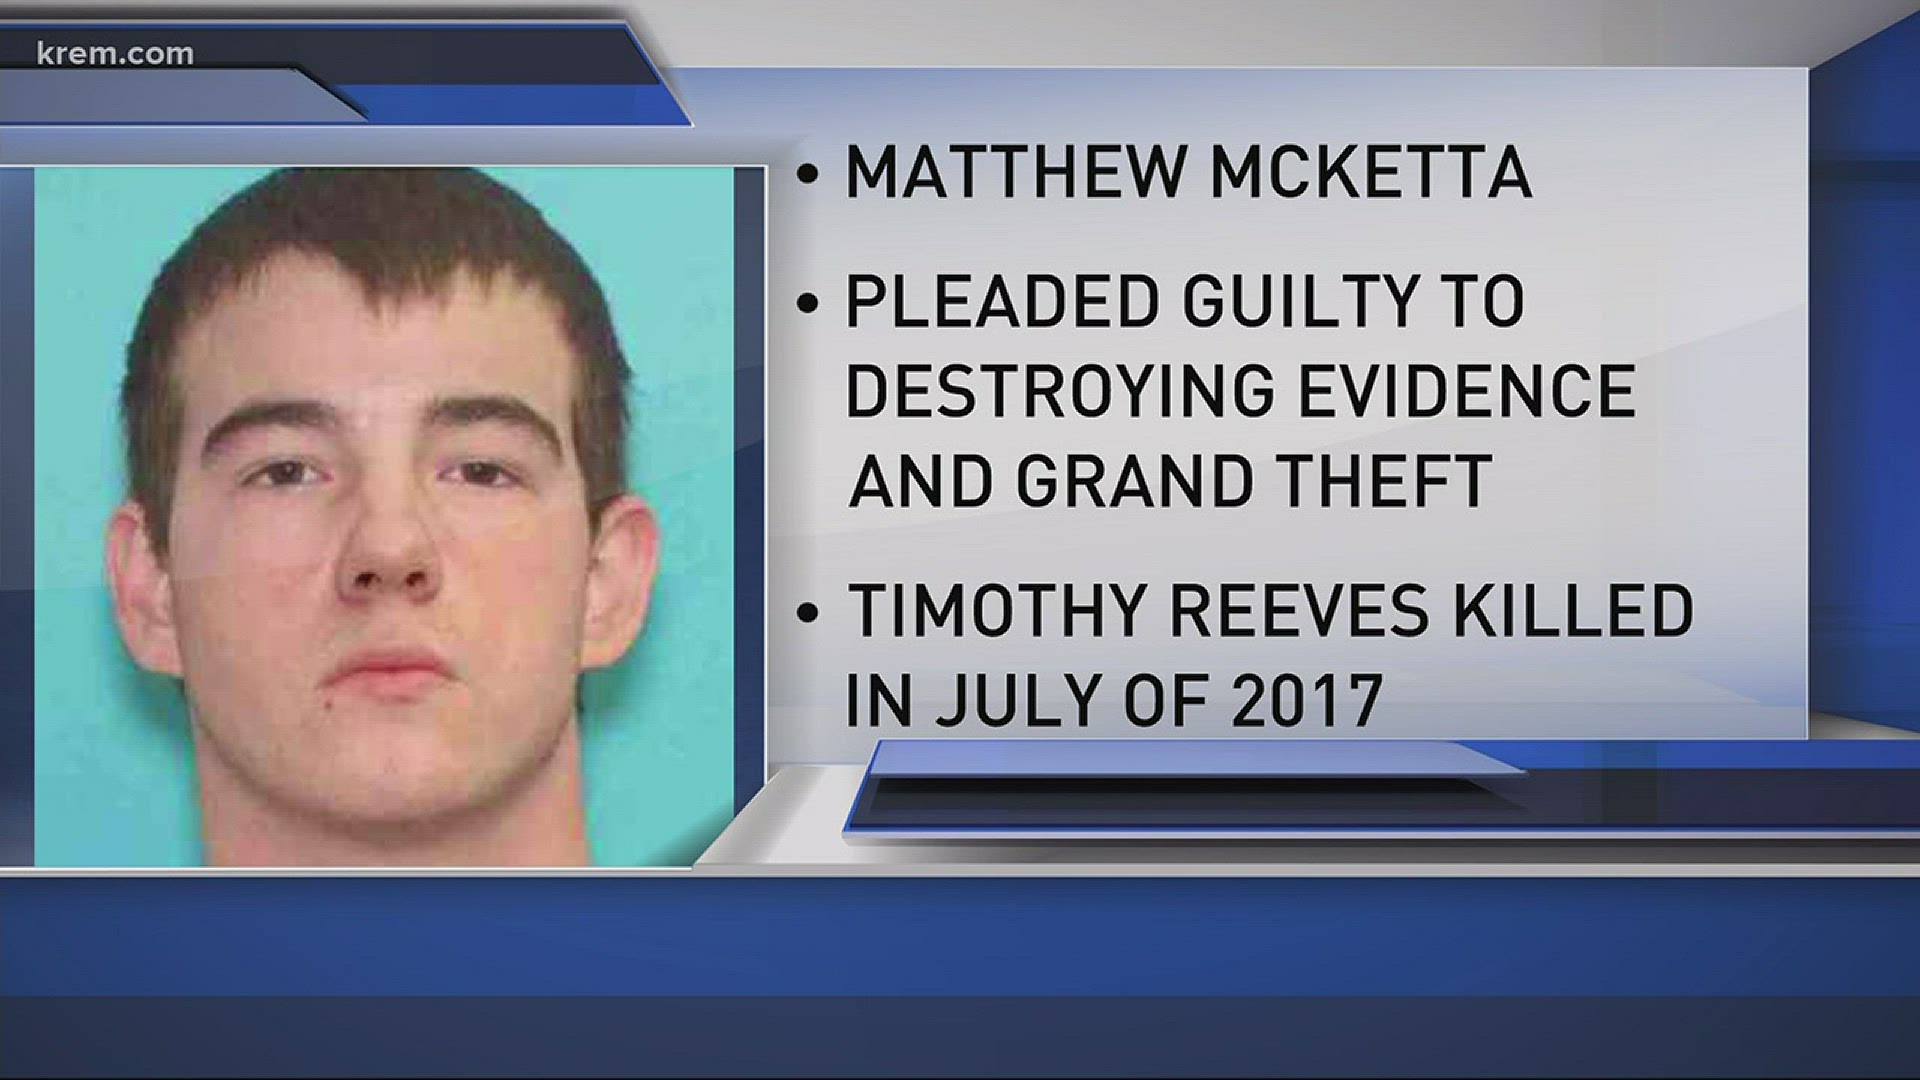 Second suspect involved in Latah Co. homicide changes plea to guilty